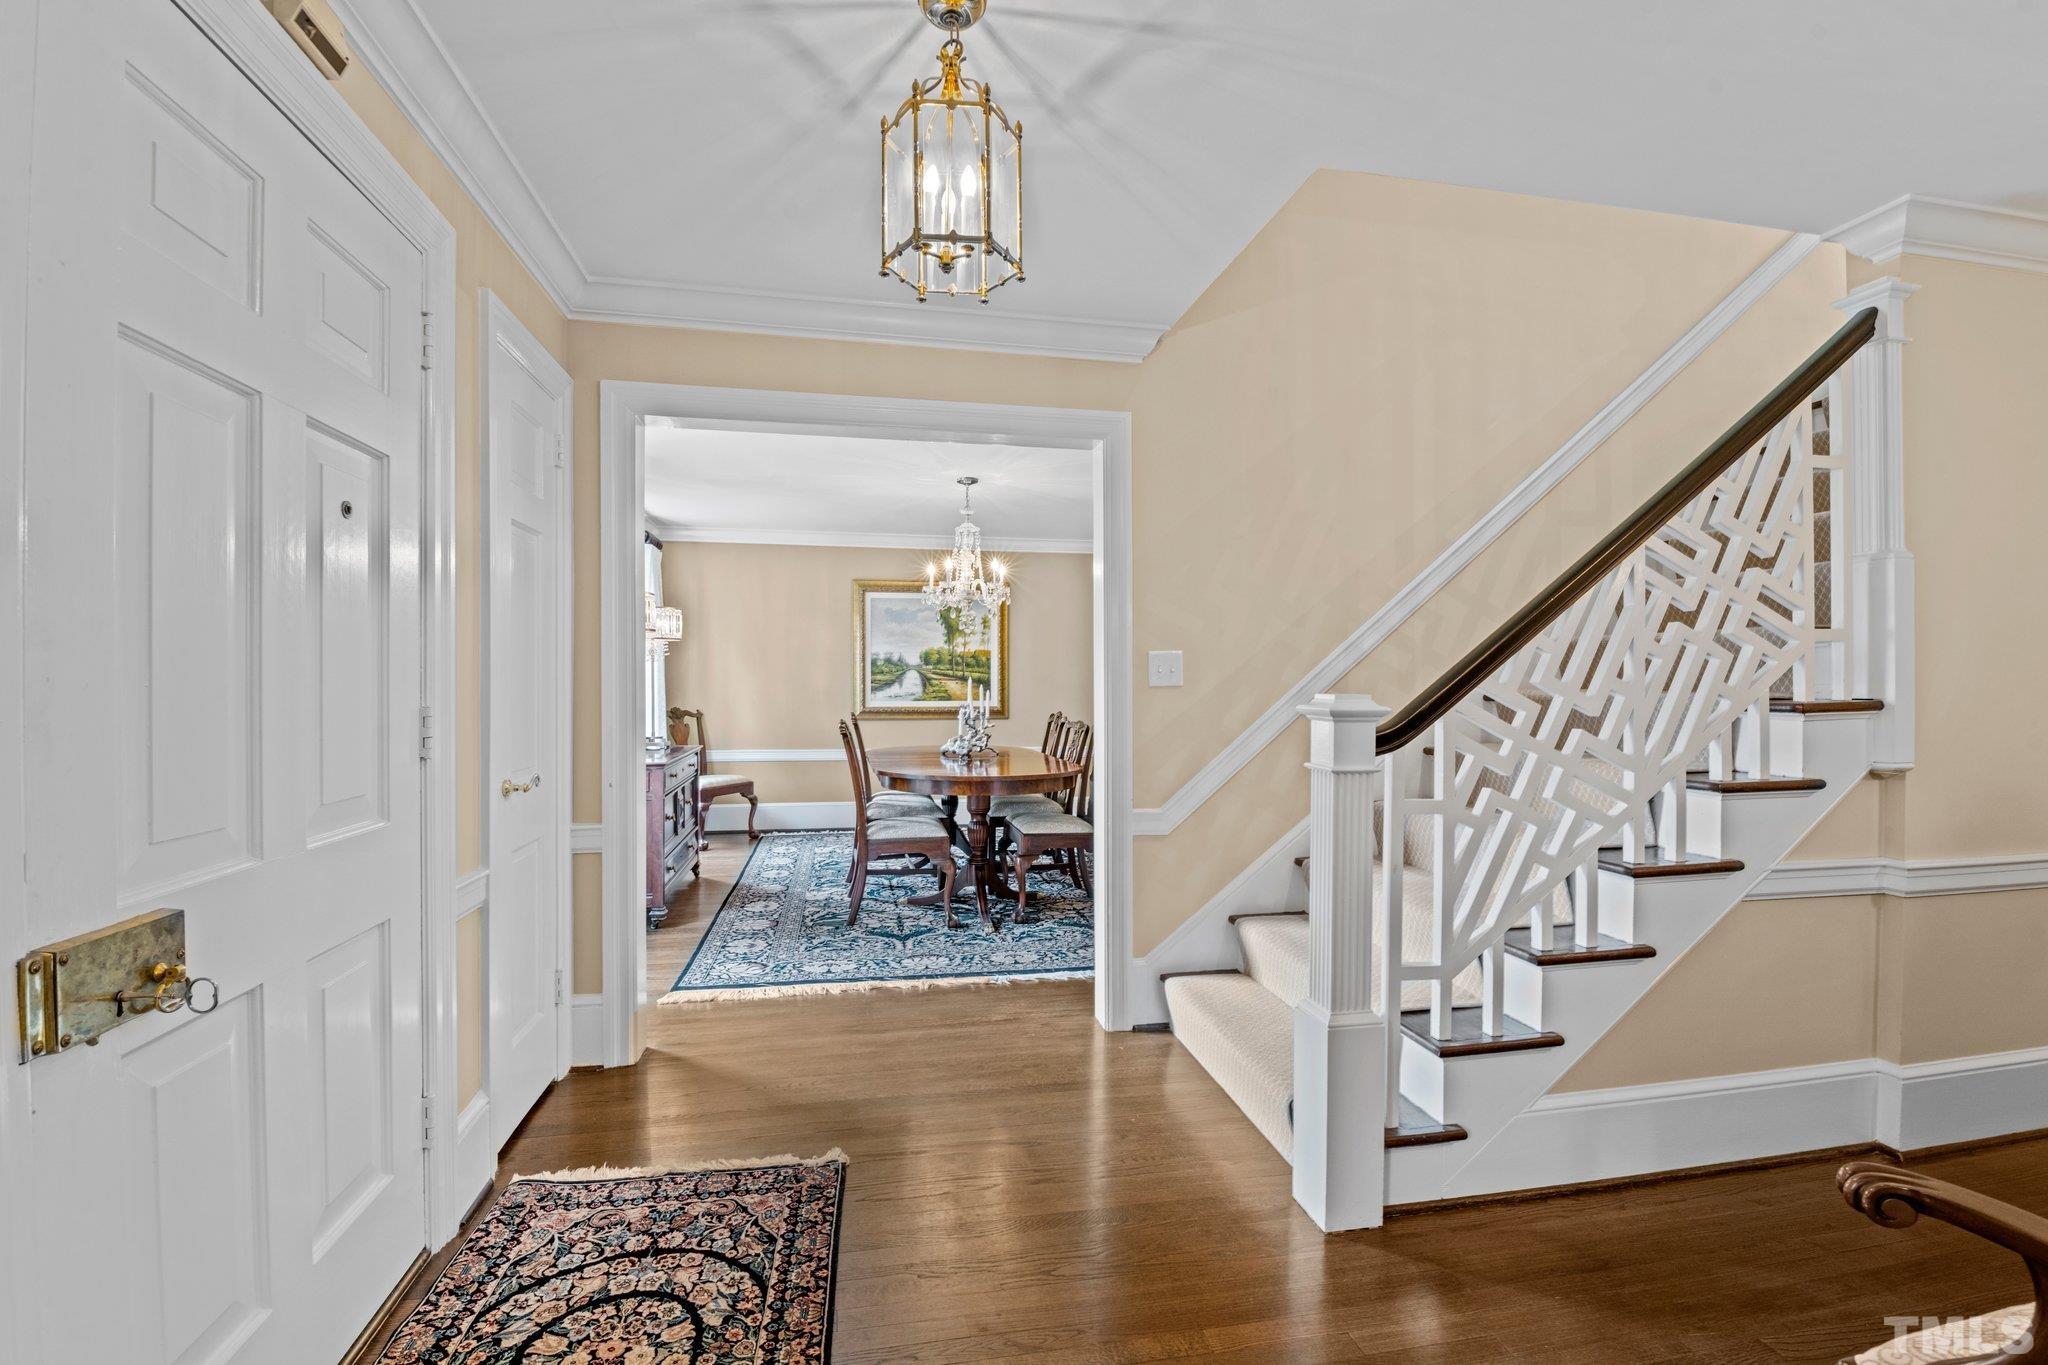 Welcoming Foyer with beautiful hardwood flooring, crown molding through out, and access to Dining Room and Living Room.